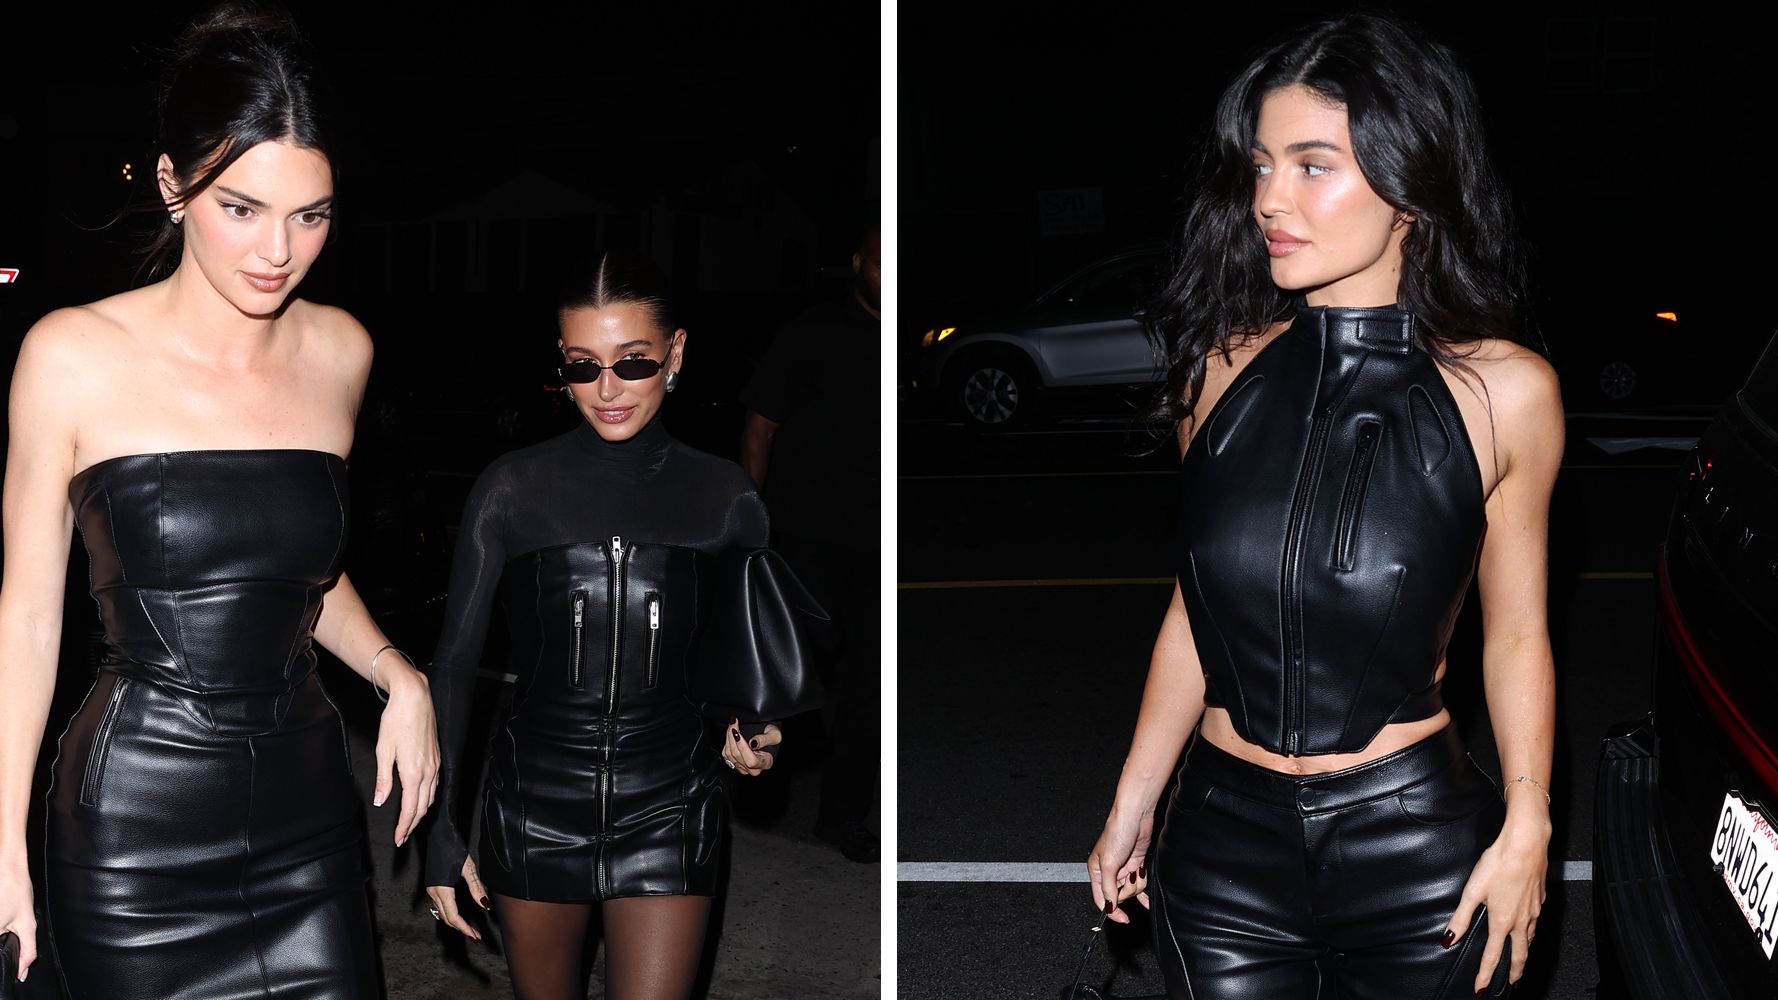 Kylie Jenner and Her Friends Looked Like the Coolest Biker Girl Squad